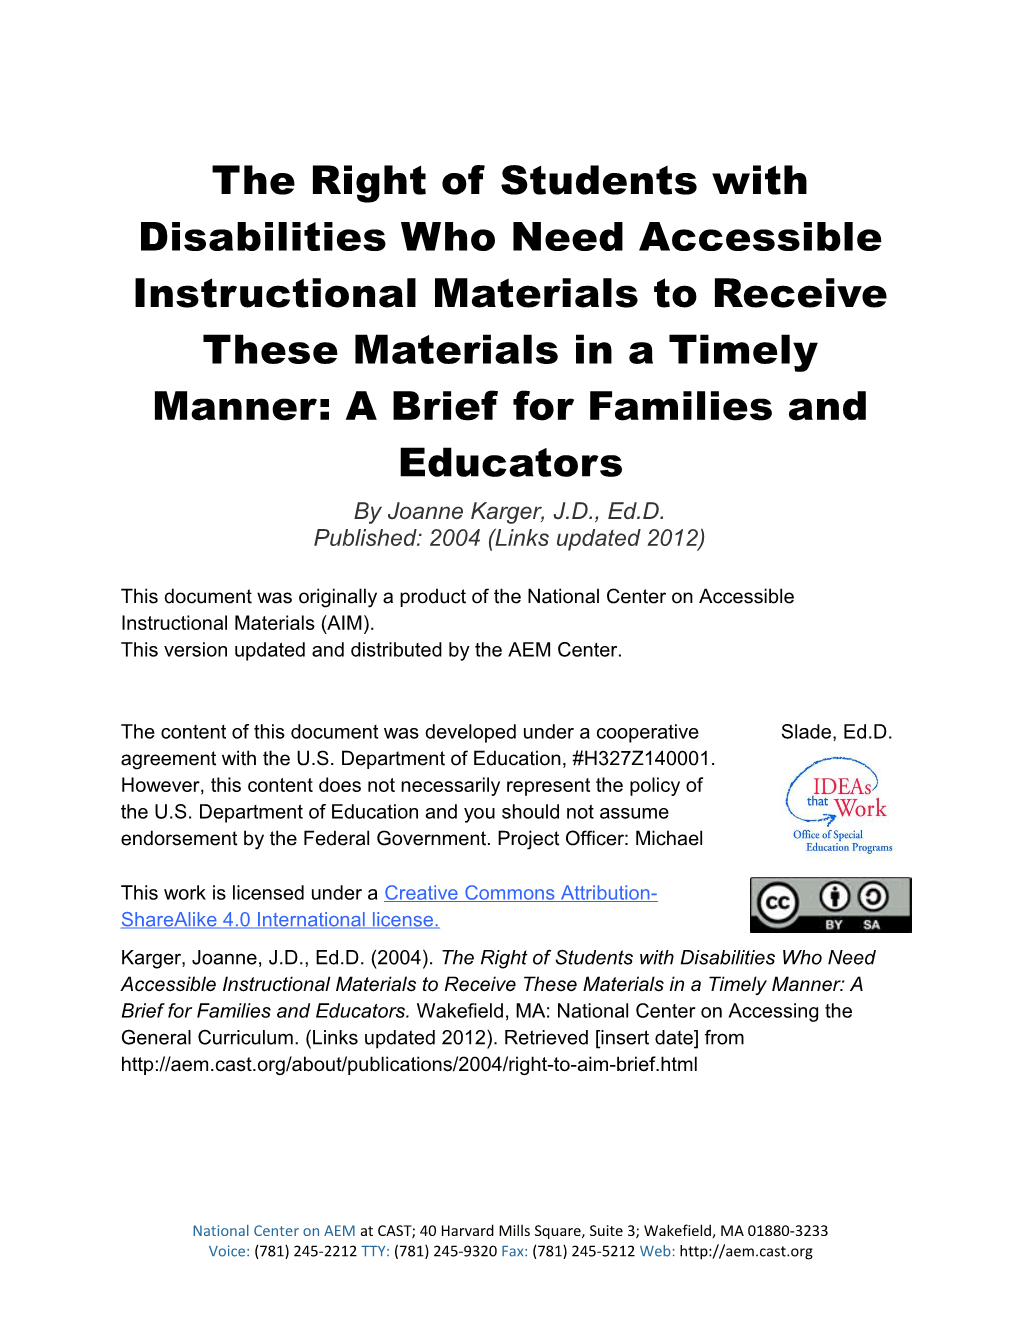 The Right of Students with Disabilities Who Need Accessible Instructional Materials To